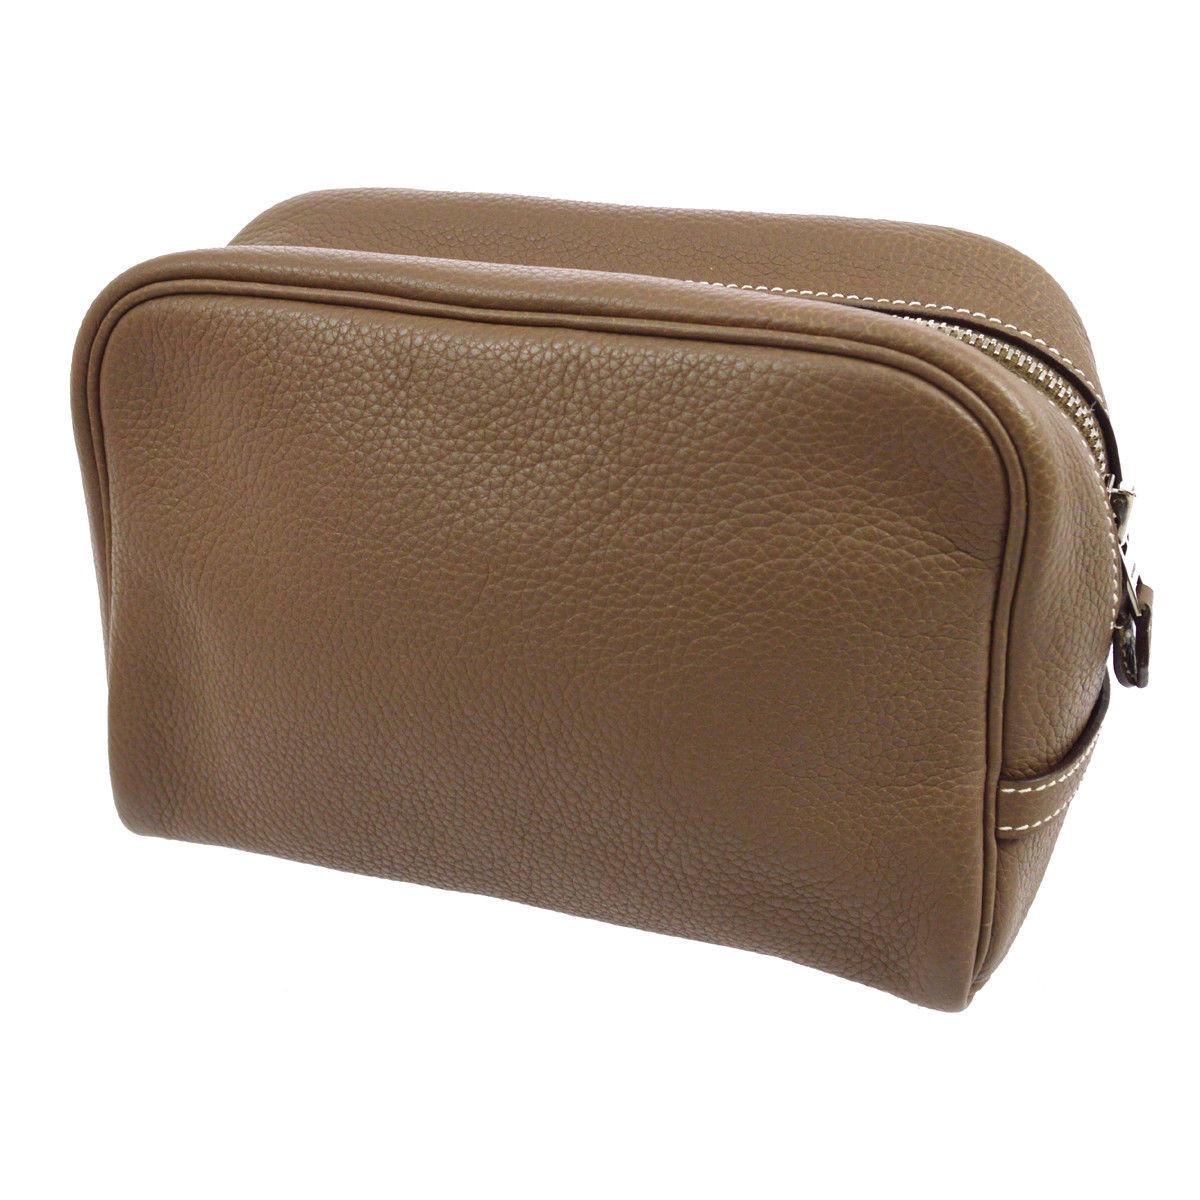 Hermes Leather Taupe Men's Women's Clutch Overnight Toiletry Travel Bag